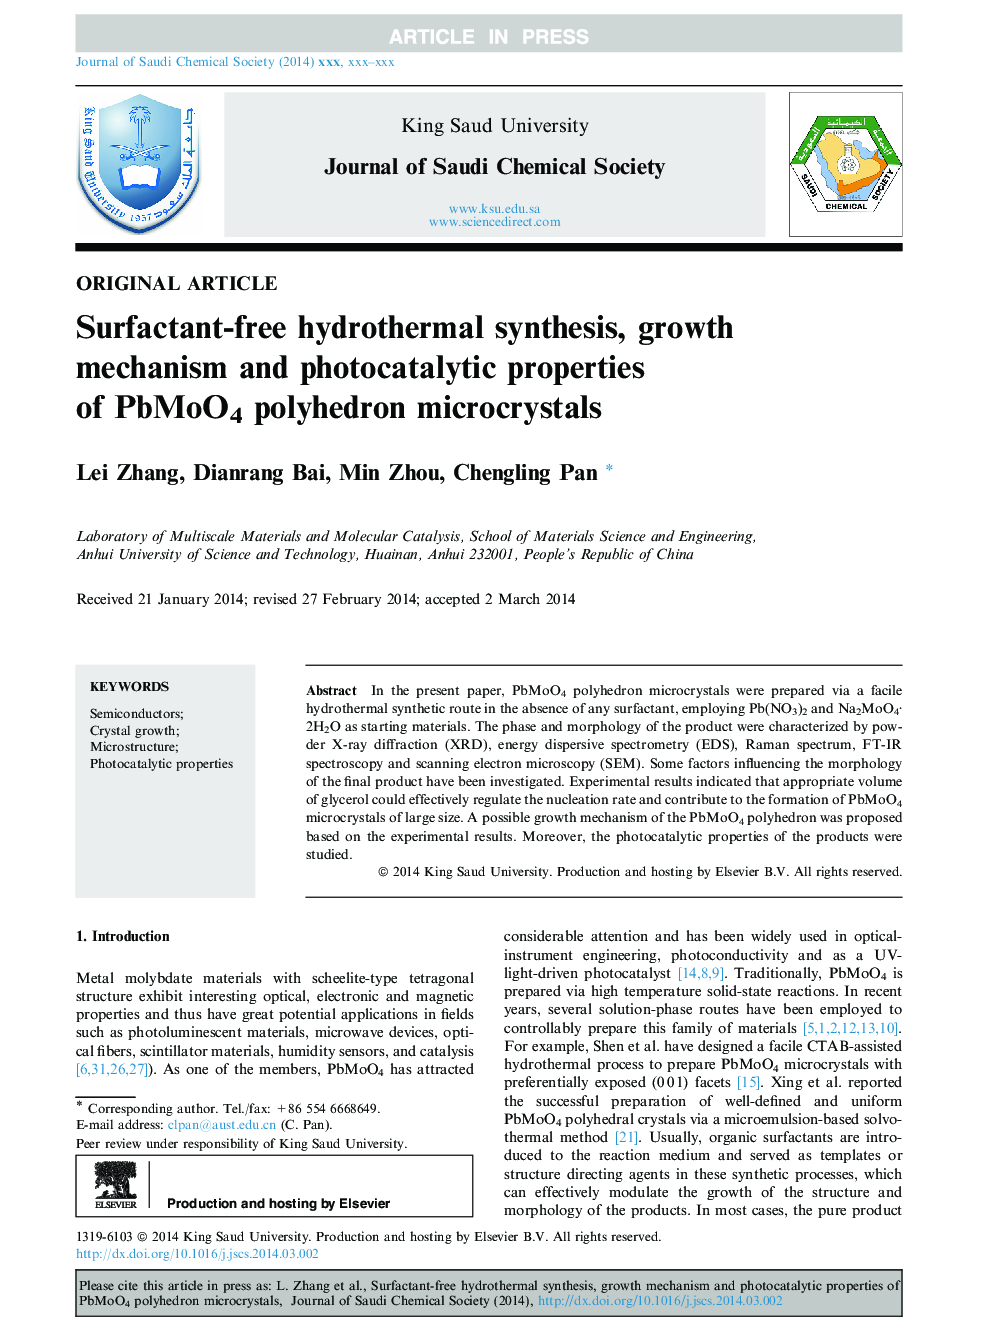 Surfactant-free hydrothermal synthesis, growth mechanism and photocatalytic properties of PbMoO4 polyhedron microcrystals